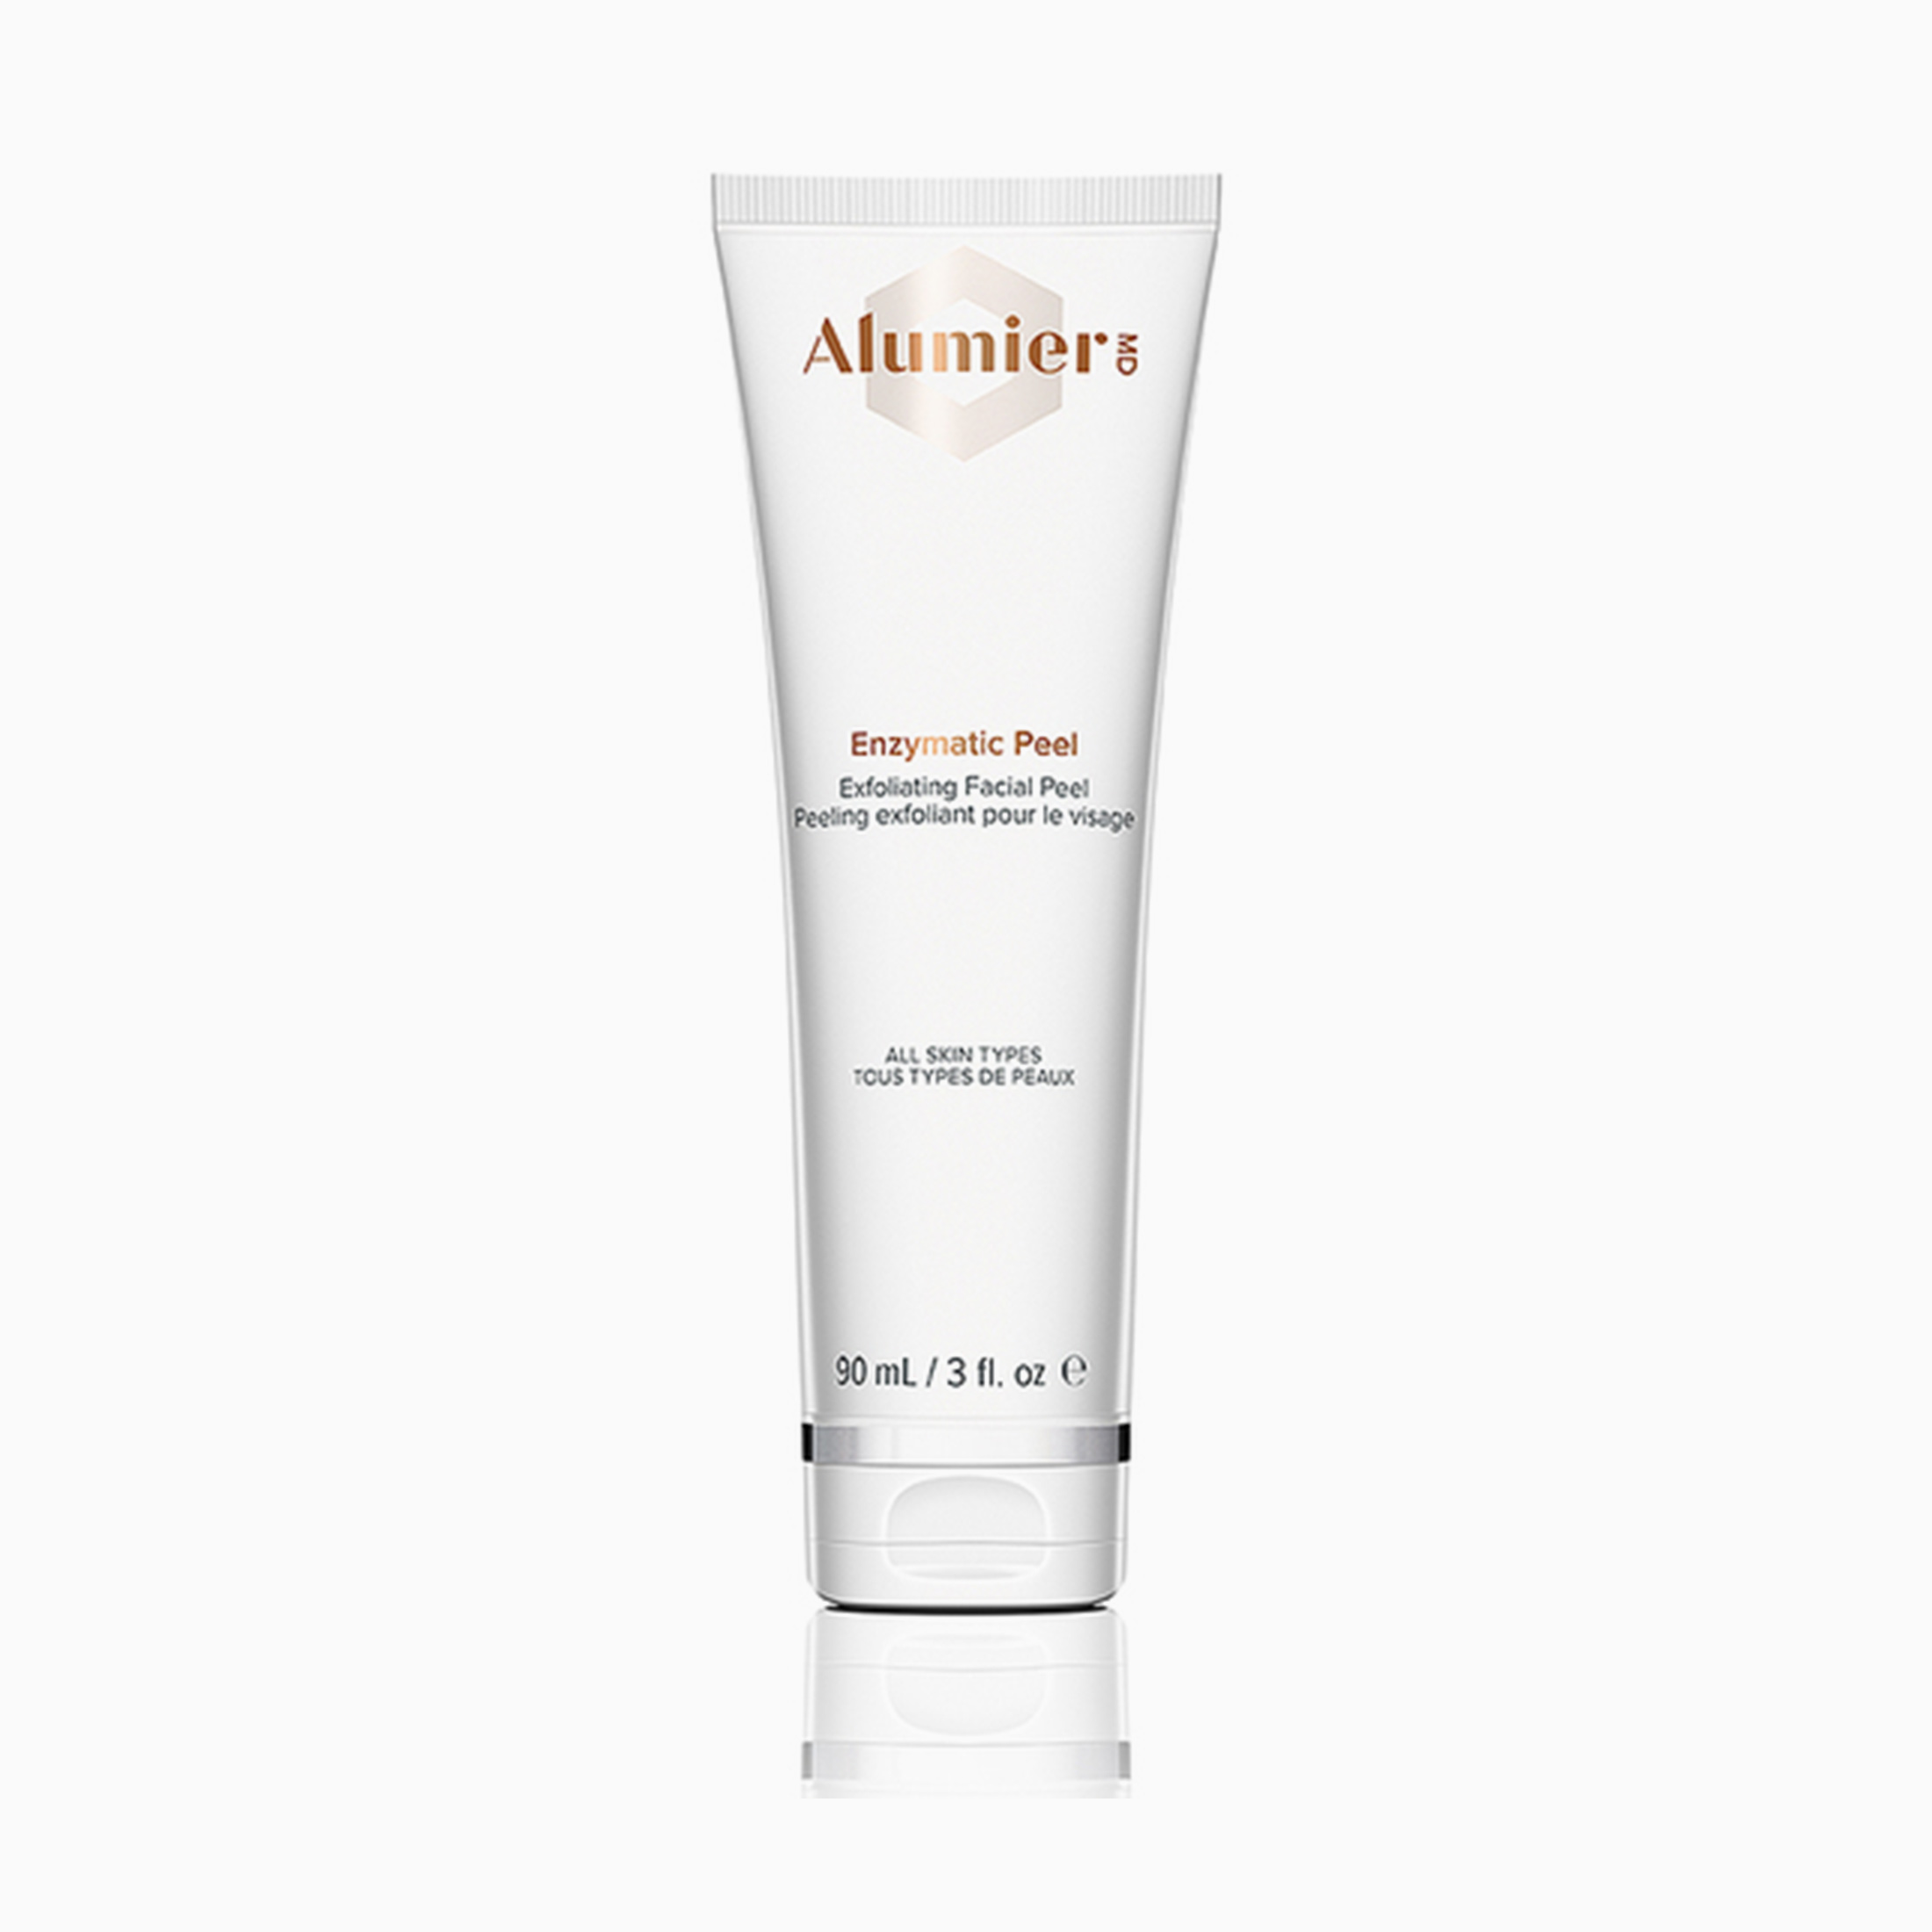 alumier is one of the best face masks